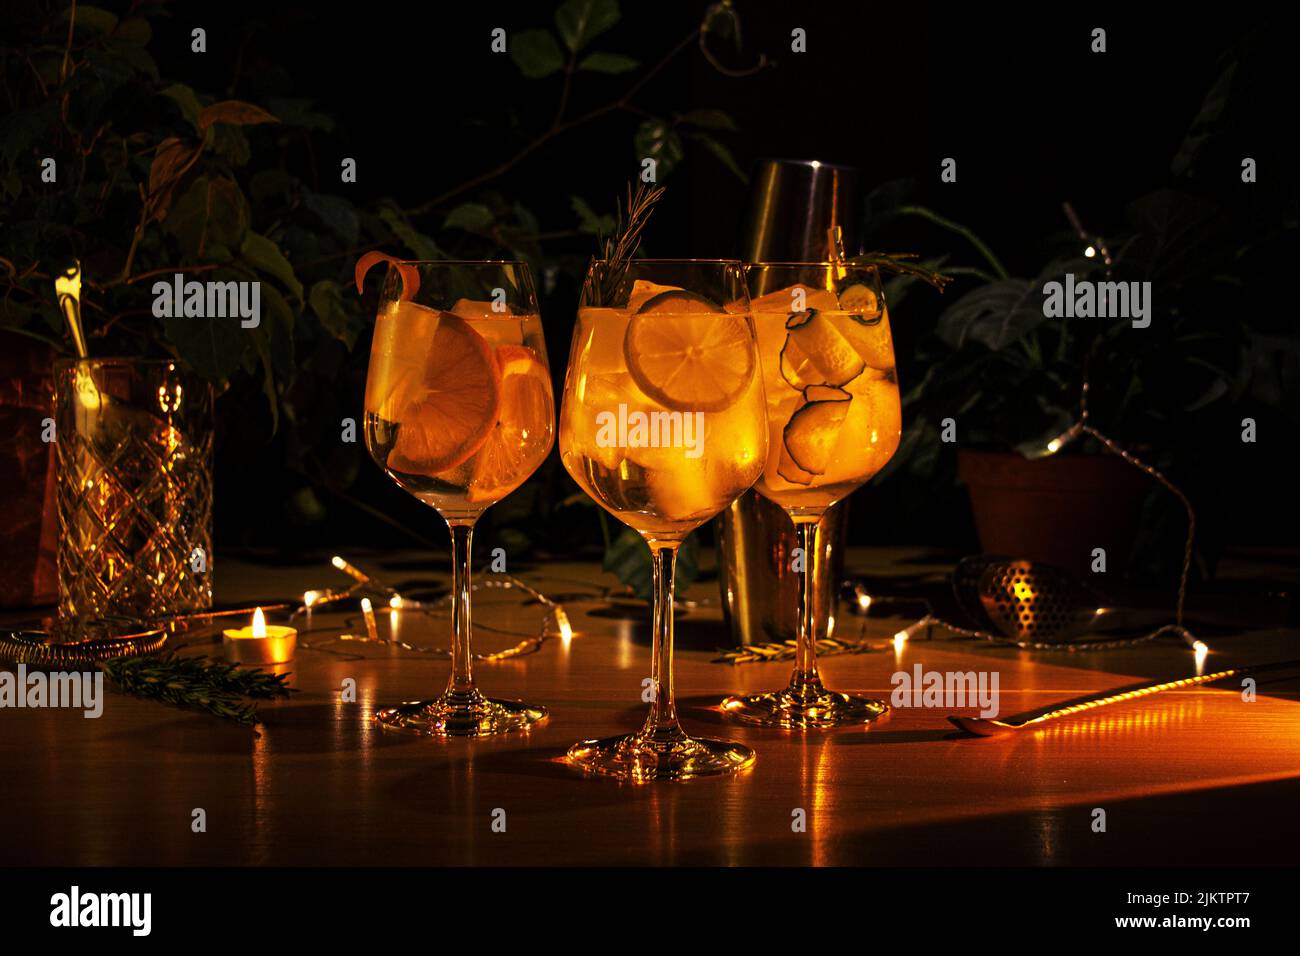 The three different gin tonic cocktails in wine glass, cozy soft backround with plants and bar equipment Stock Photo